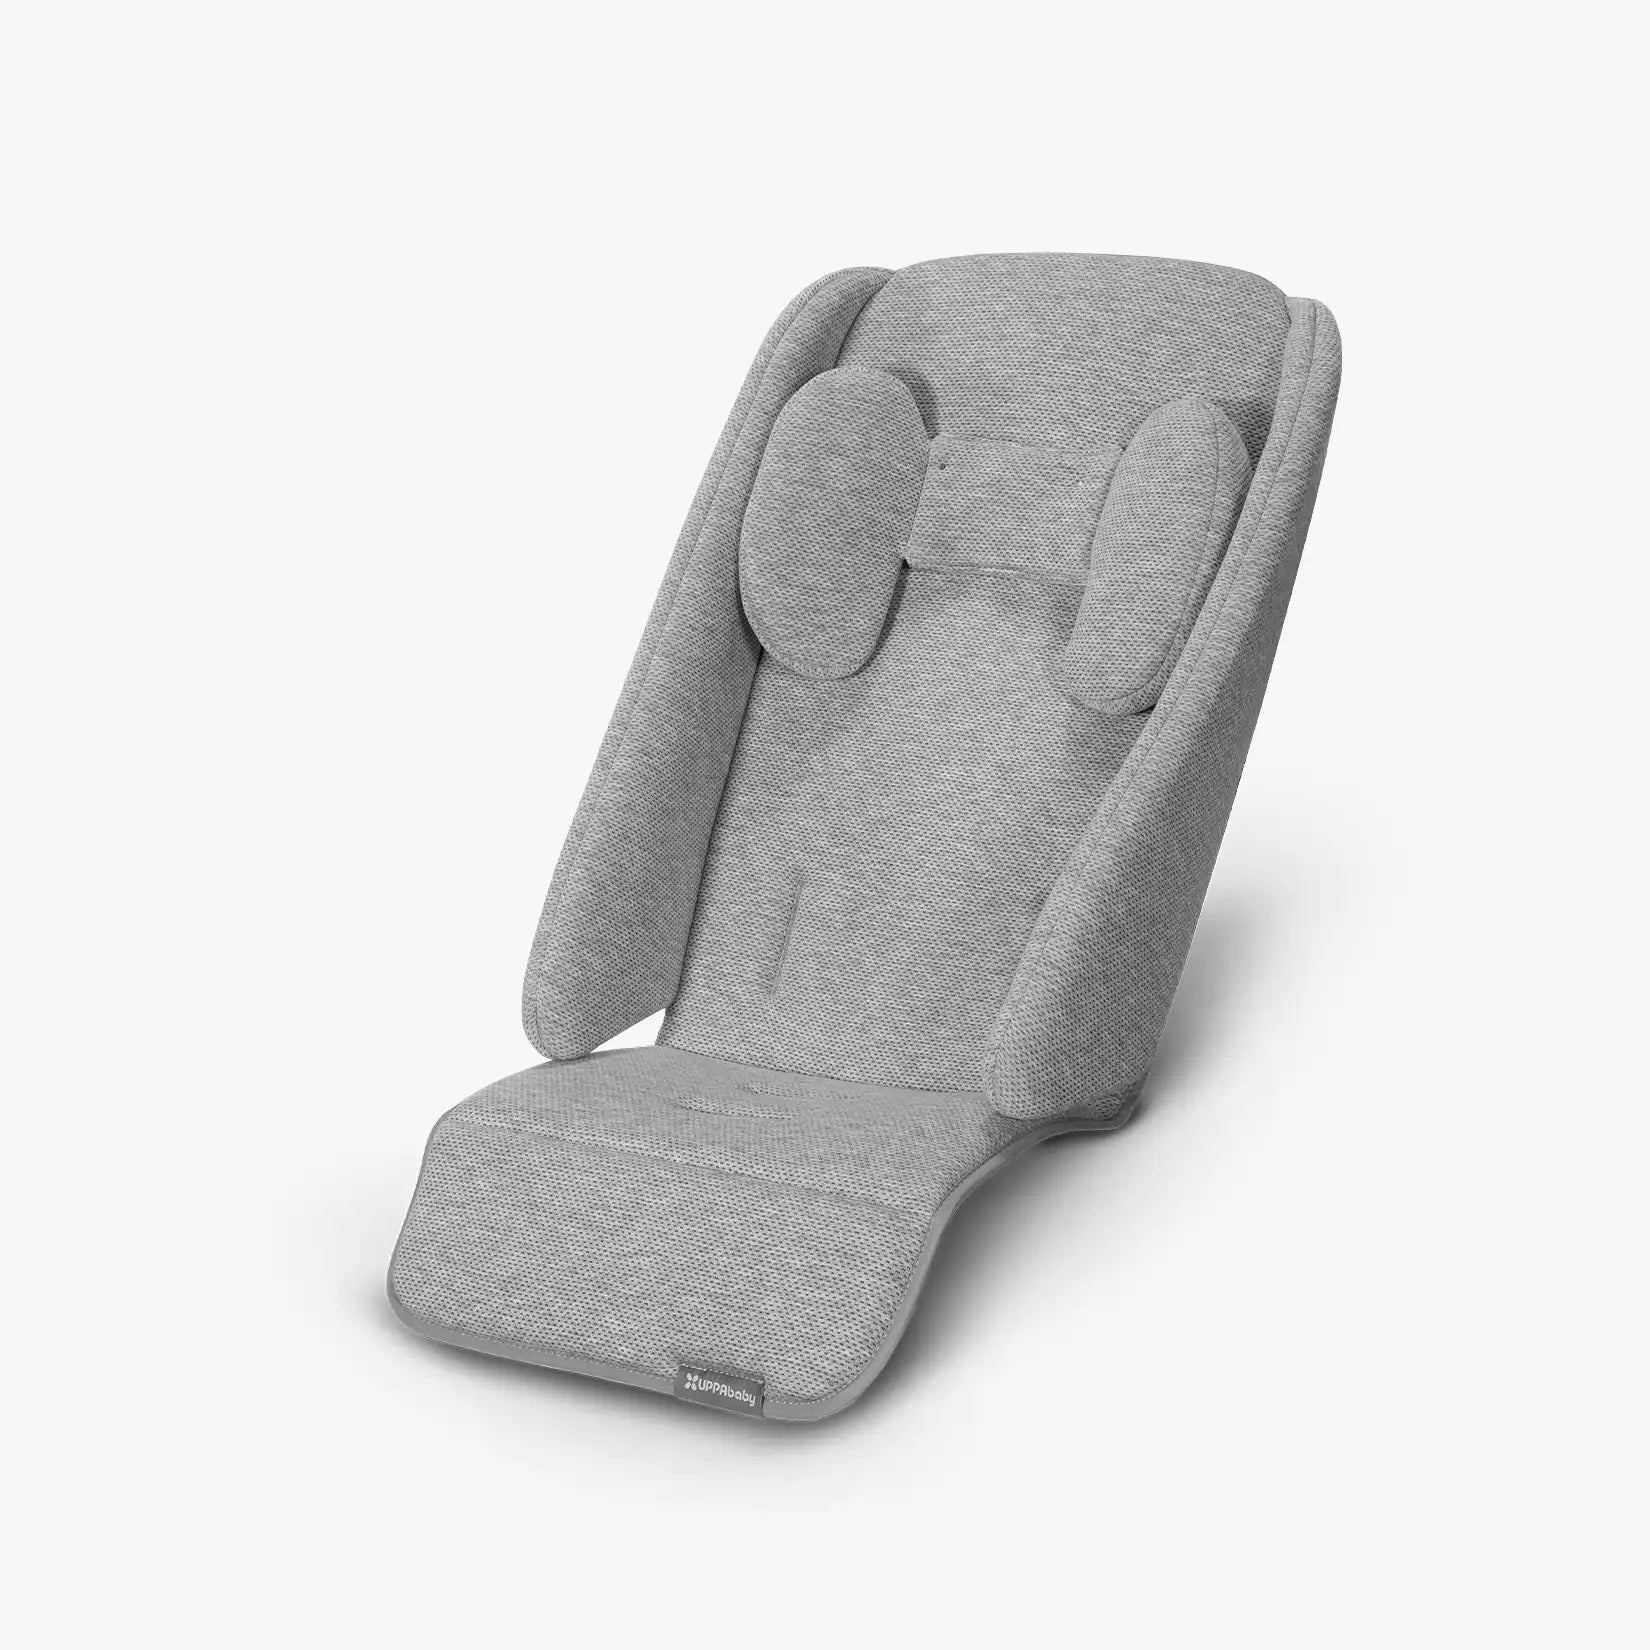 UPPAbaby Infant SnugSeat